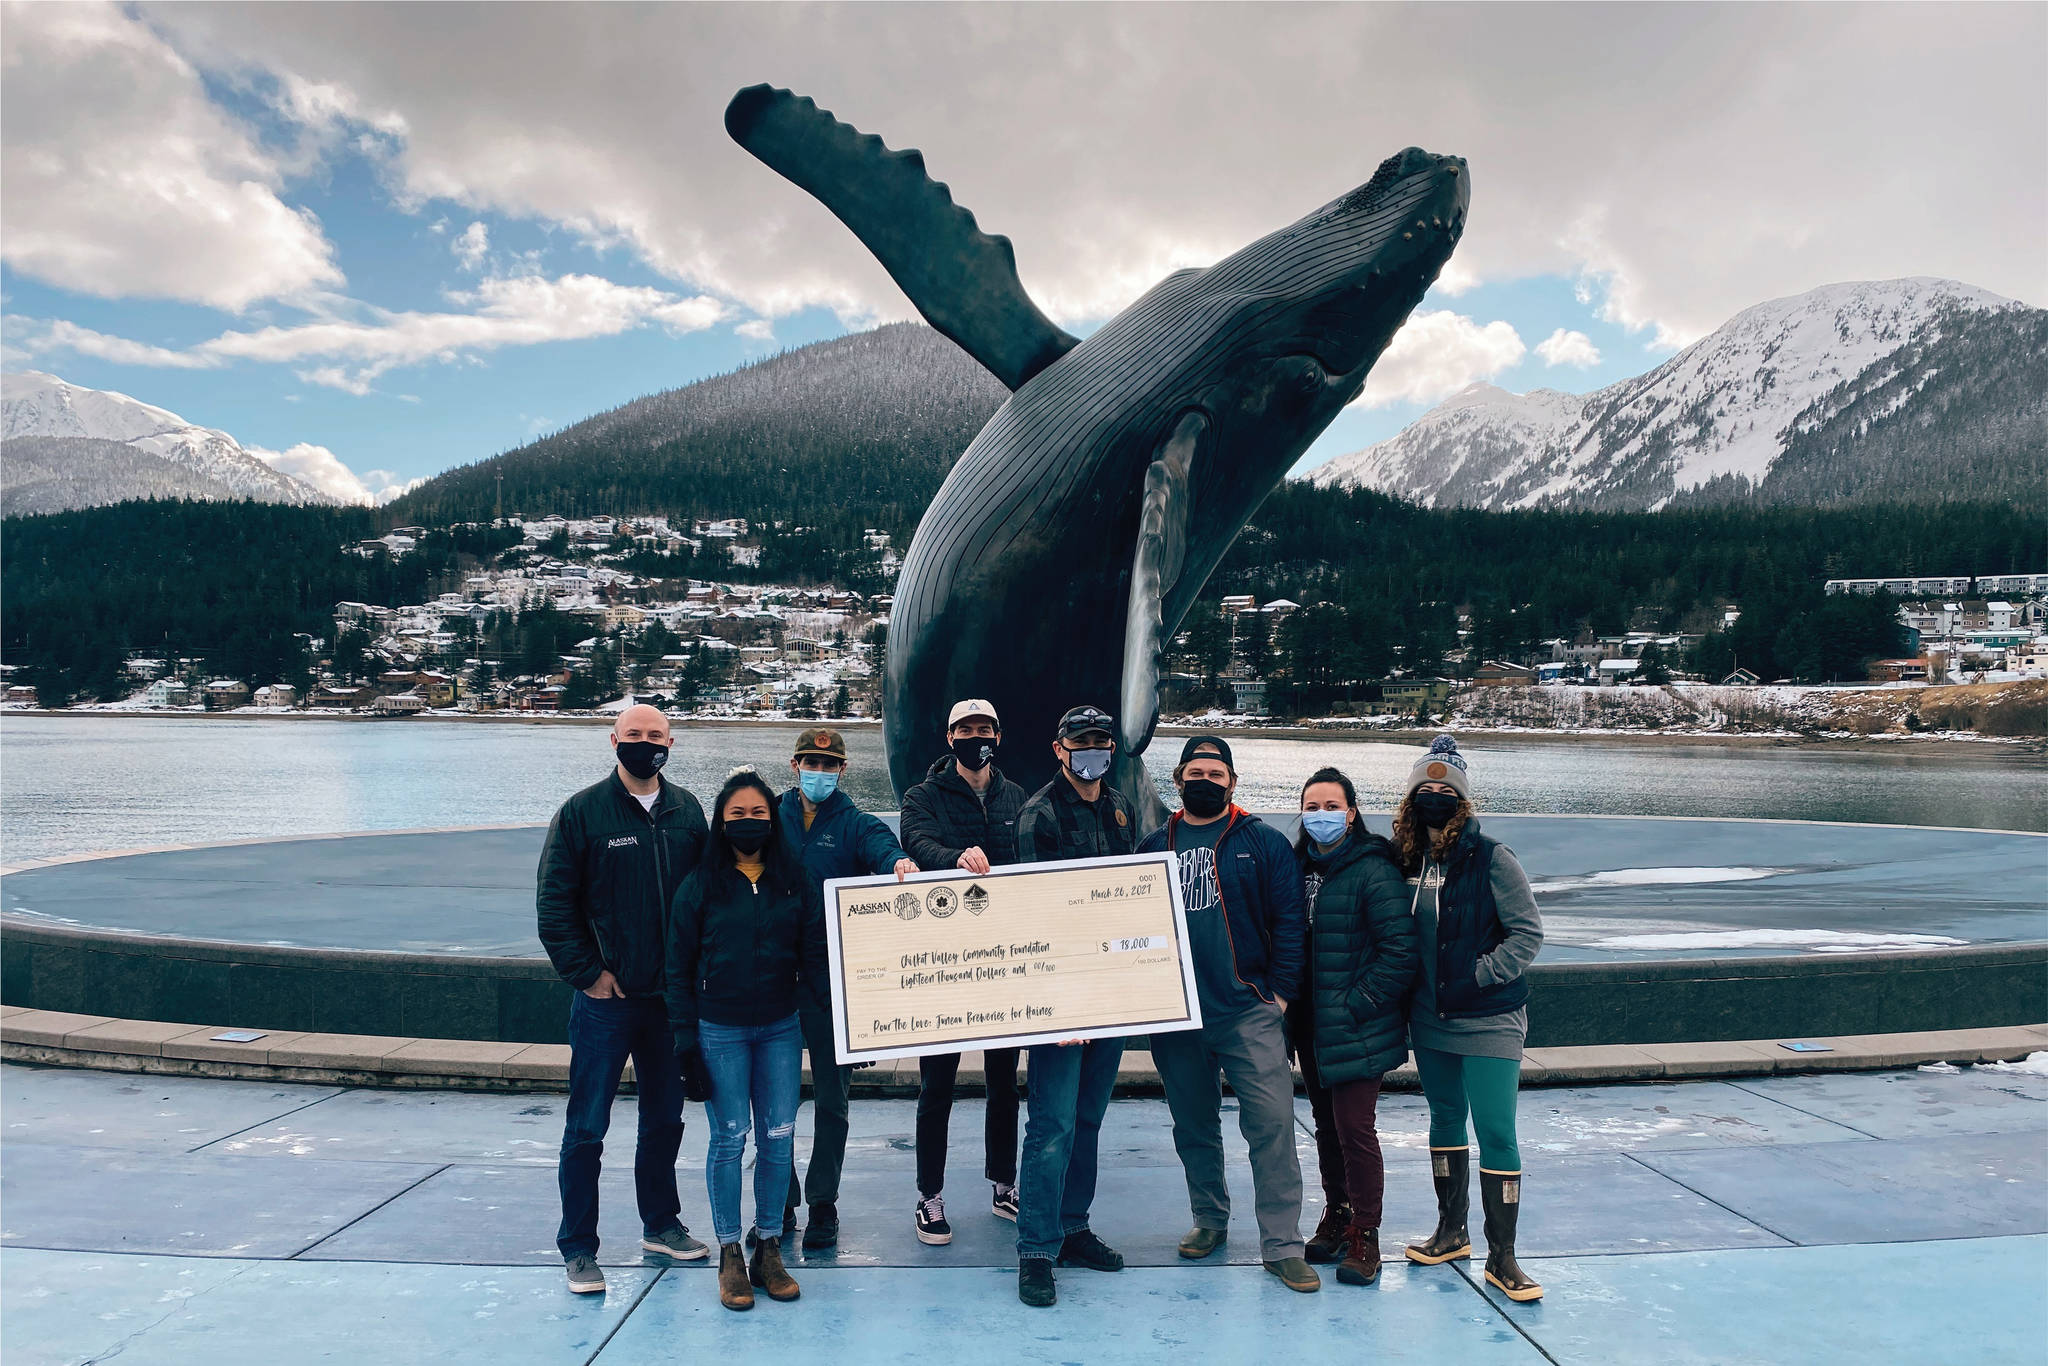 Juneau’s breweries, with a funds-matching donation from the Rasmuson Foundation, donated $36,000 to the Chilkat Valley Community Foundation to assist with relief from last year’s fatal landslides as part of the “Pour the Love” fundraiser on March 30, 2021. (Courtesy photo / Meghan Chambers)